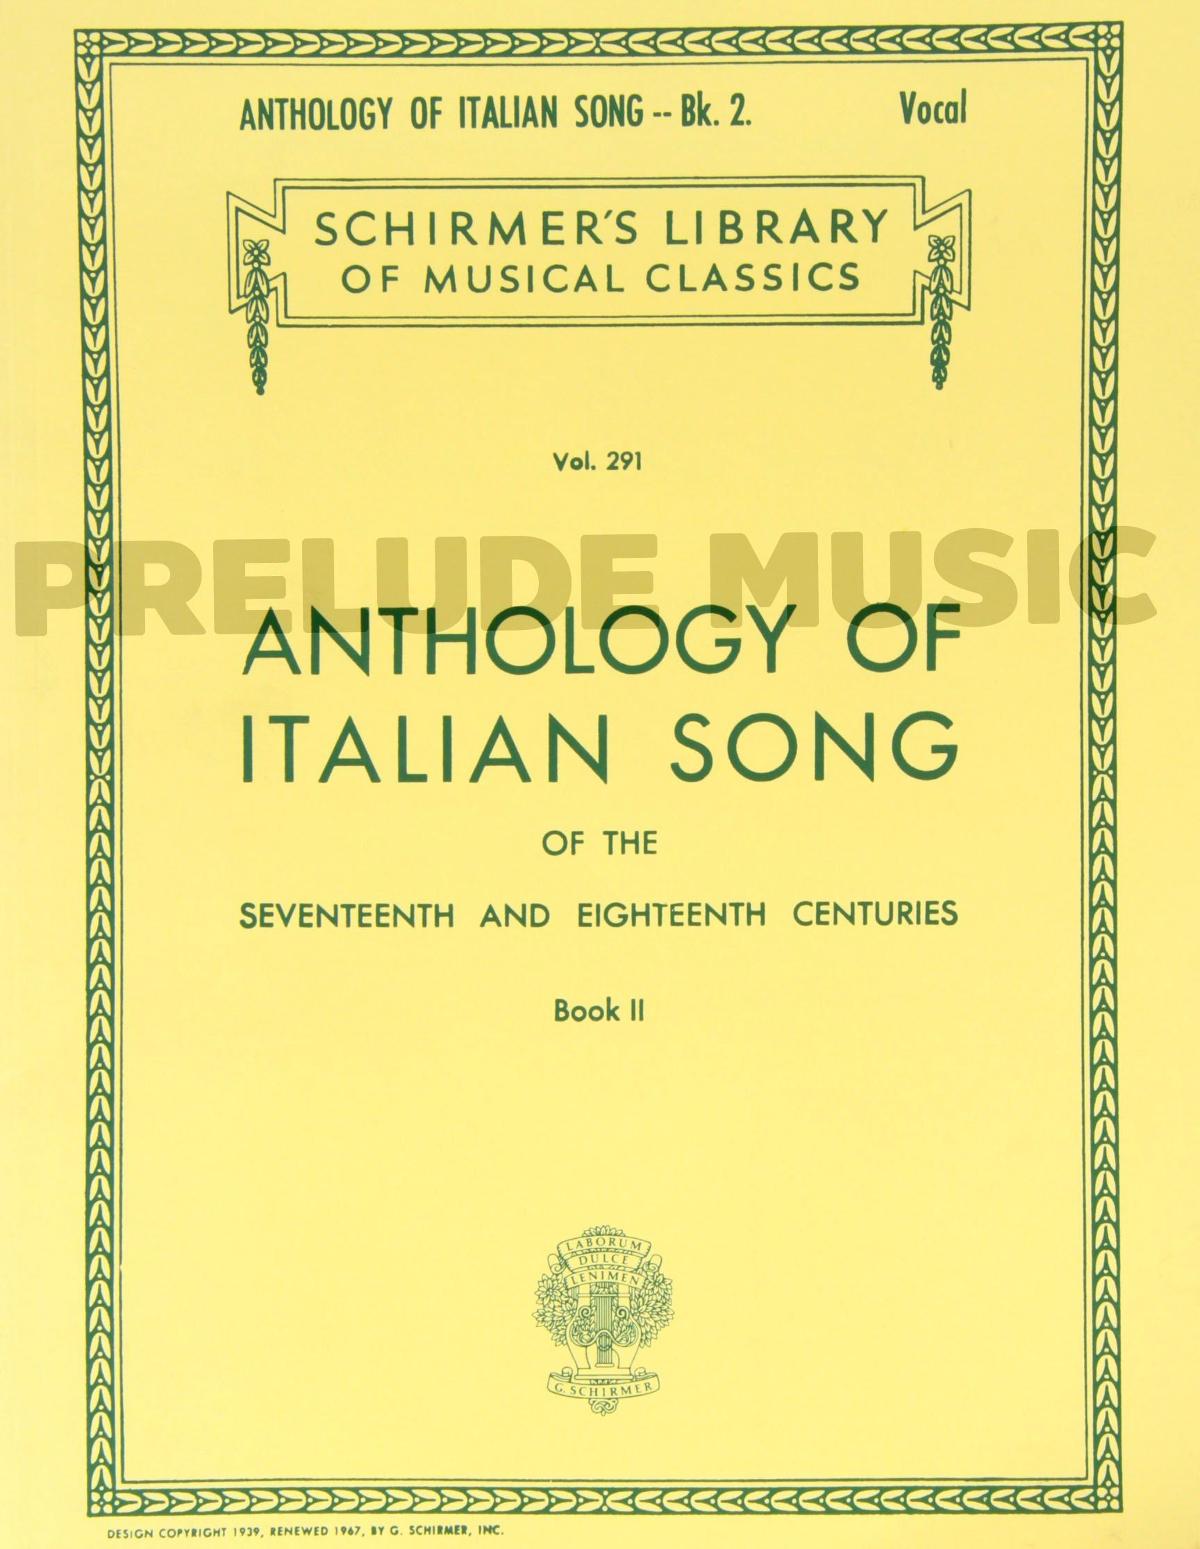 Anthology of Italian Song of the 17th and 18th Centuries